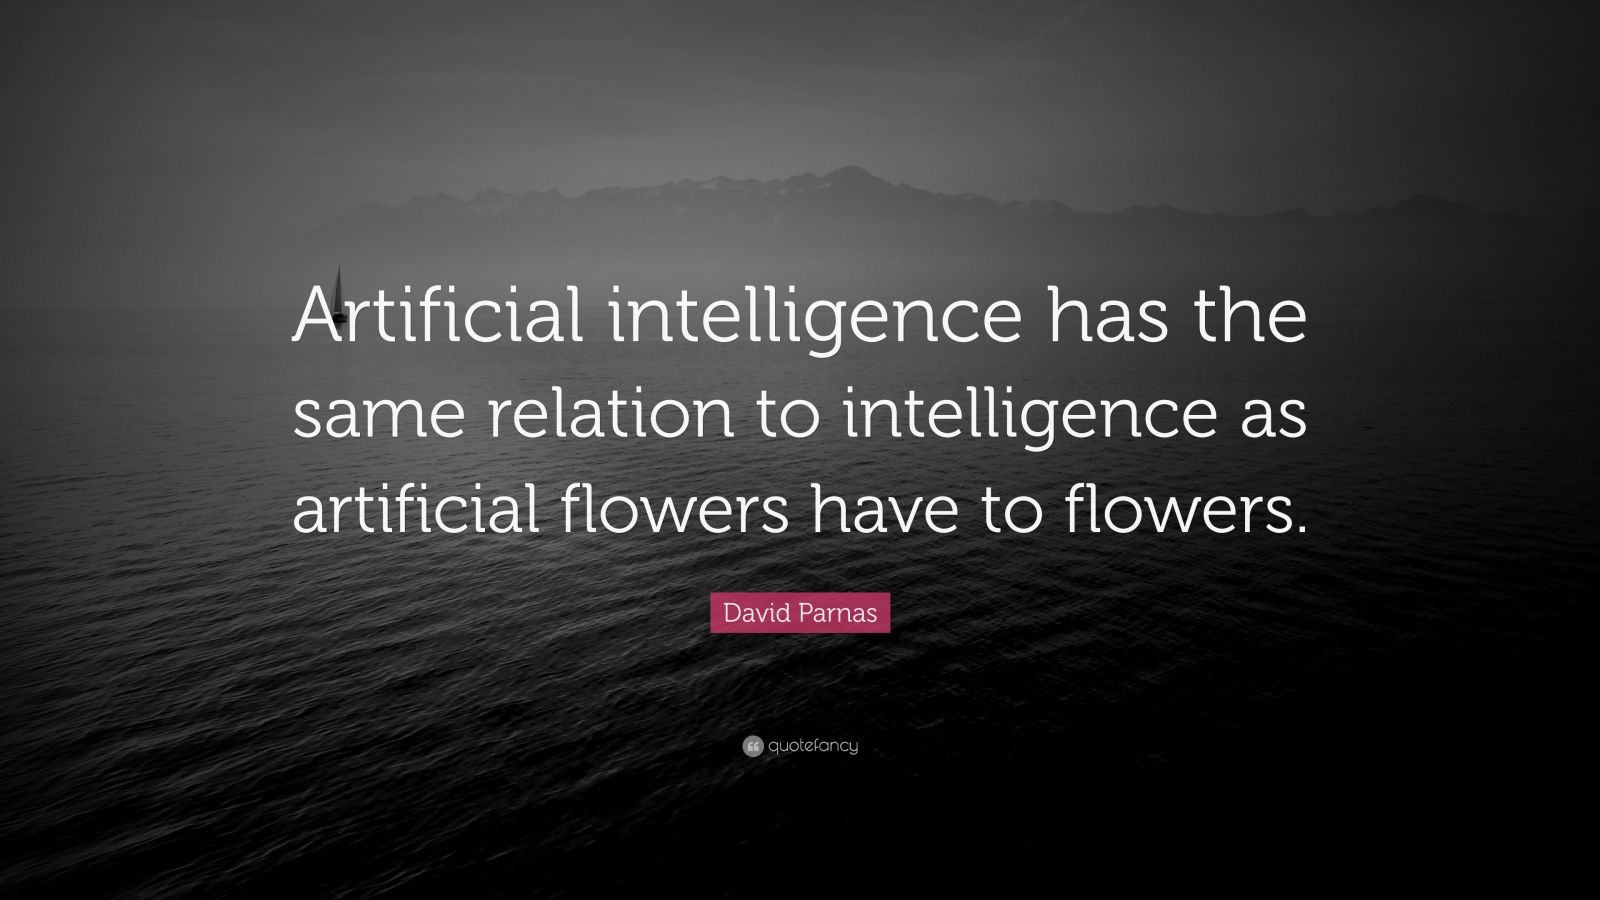 David Parnas Quote: “Artificial intelligence has the same relation to ...